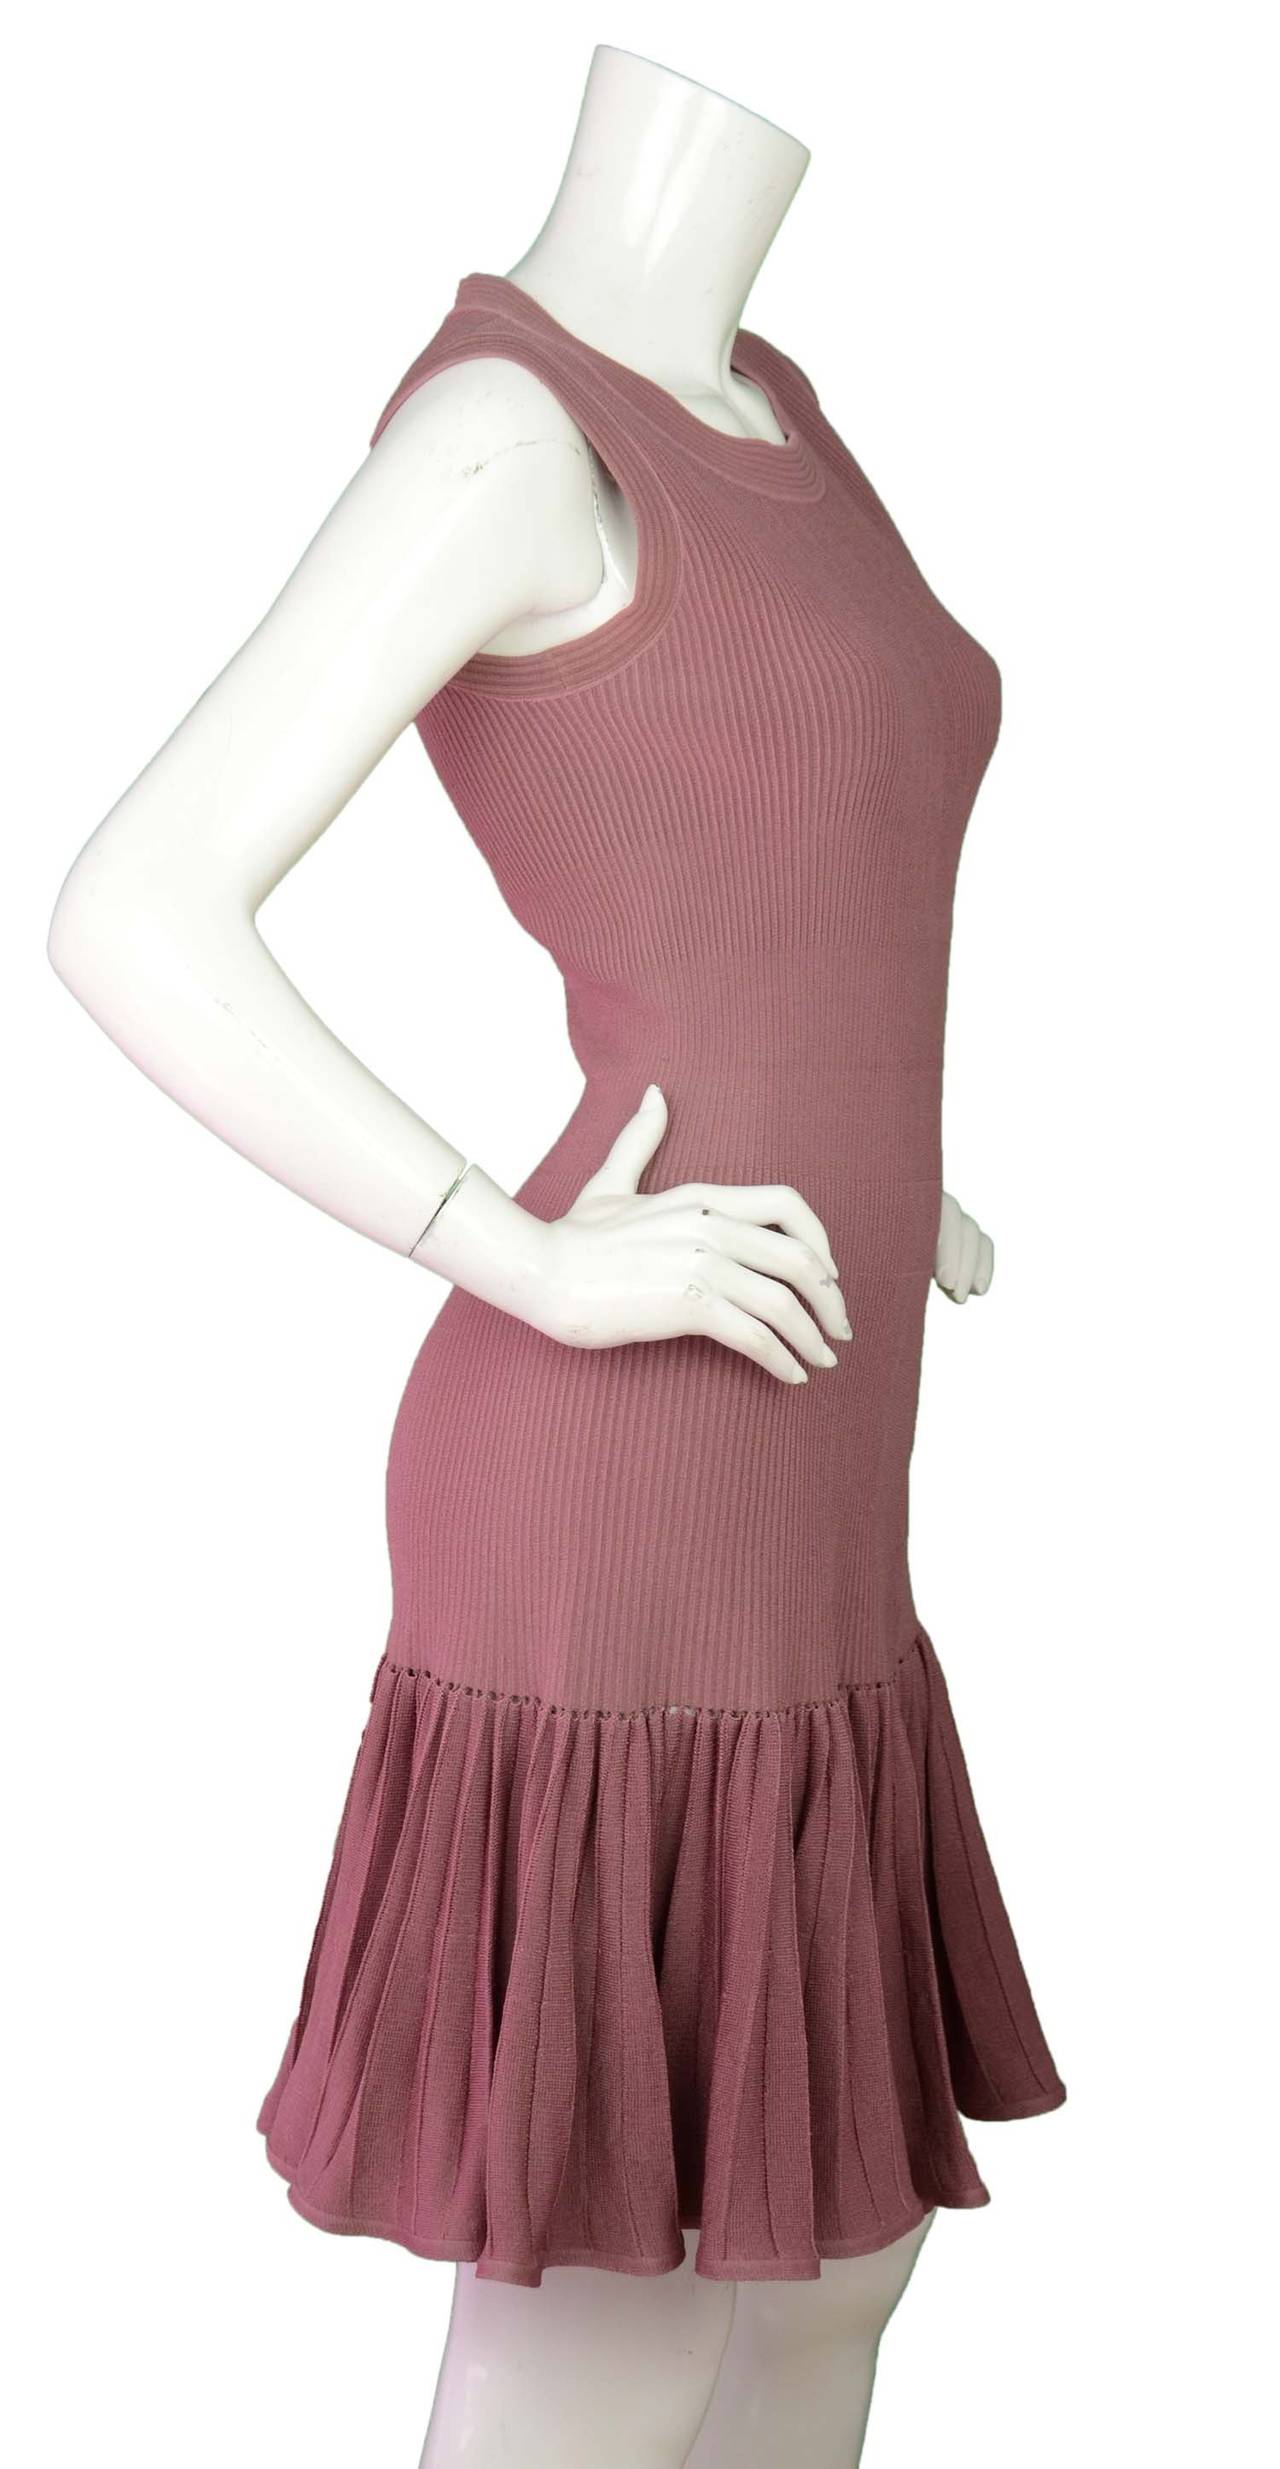 Alaia Mauve Ribbed Flounce Dress
Features pleats within flare at bottom of dress

    Made in: Italy
    Color: Mauve
    Composition: 80% silk, 15% viscose, 5% nylon
    Lining: None
    Closure/opening: Back center zipper
    Exterior